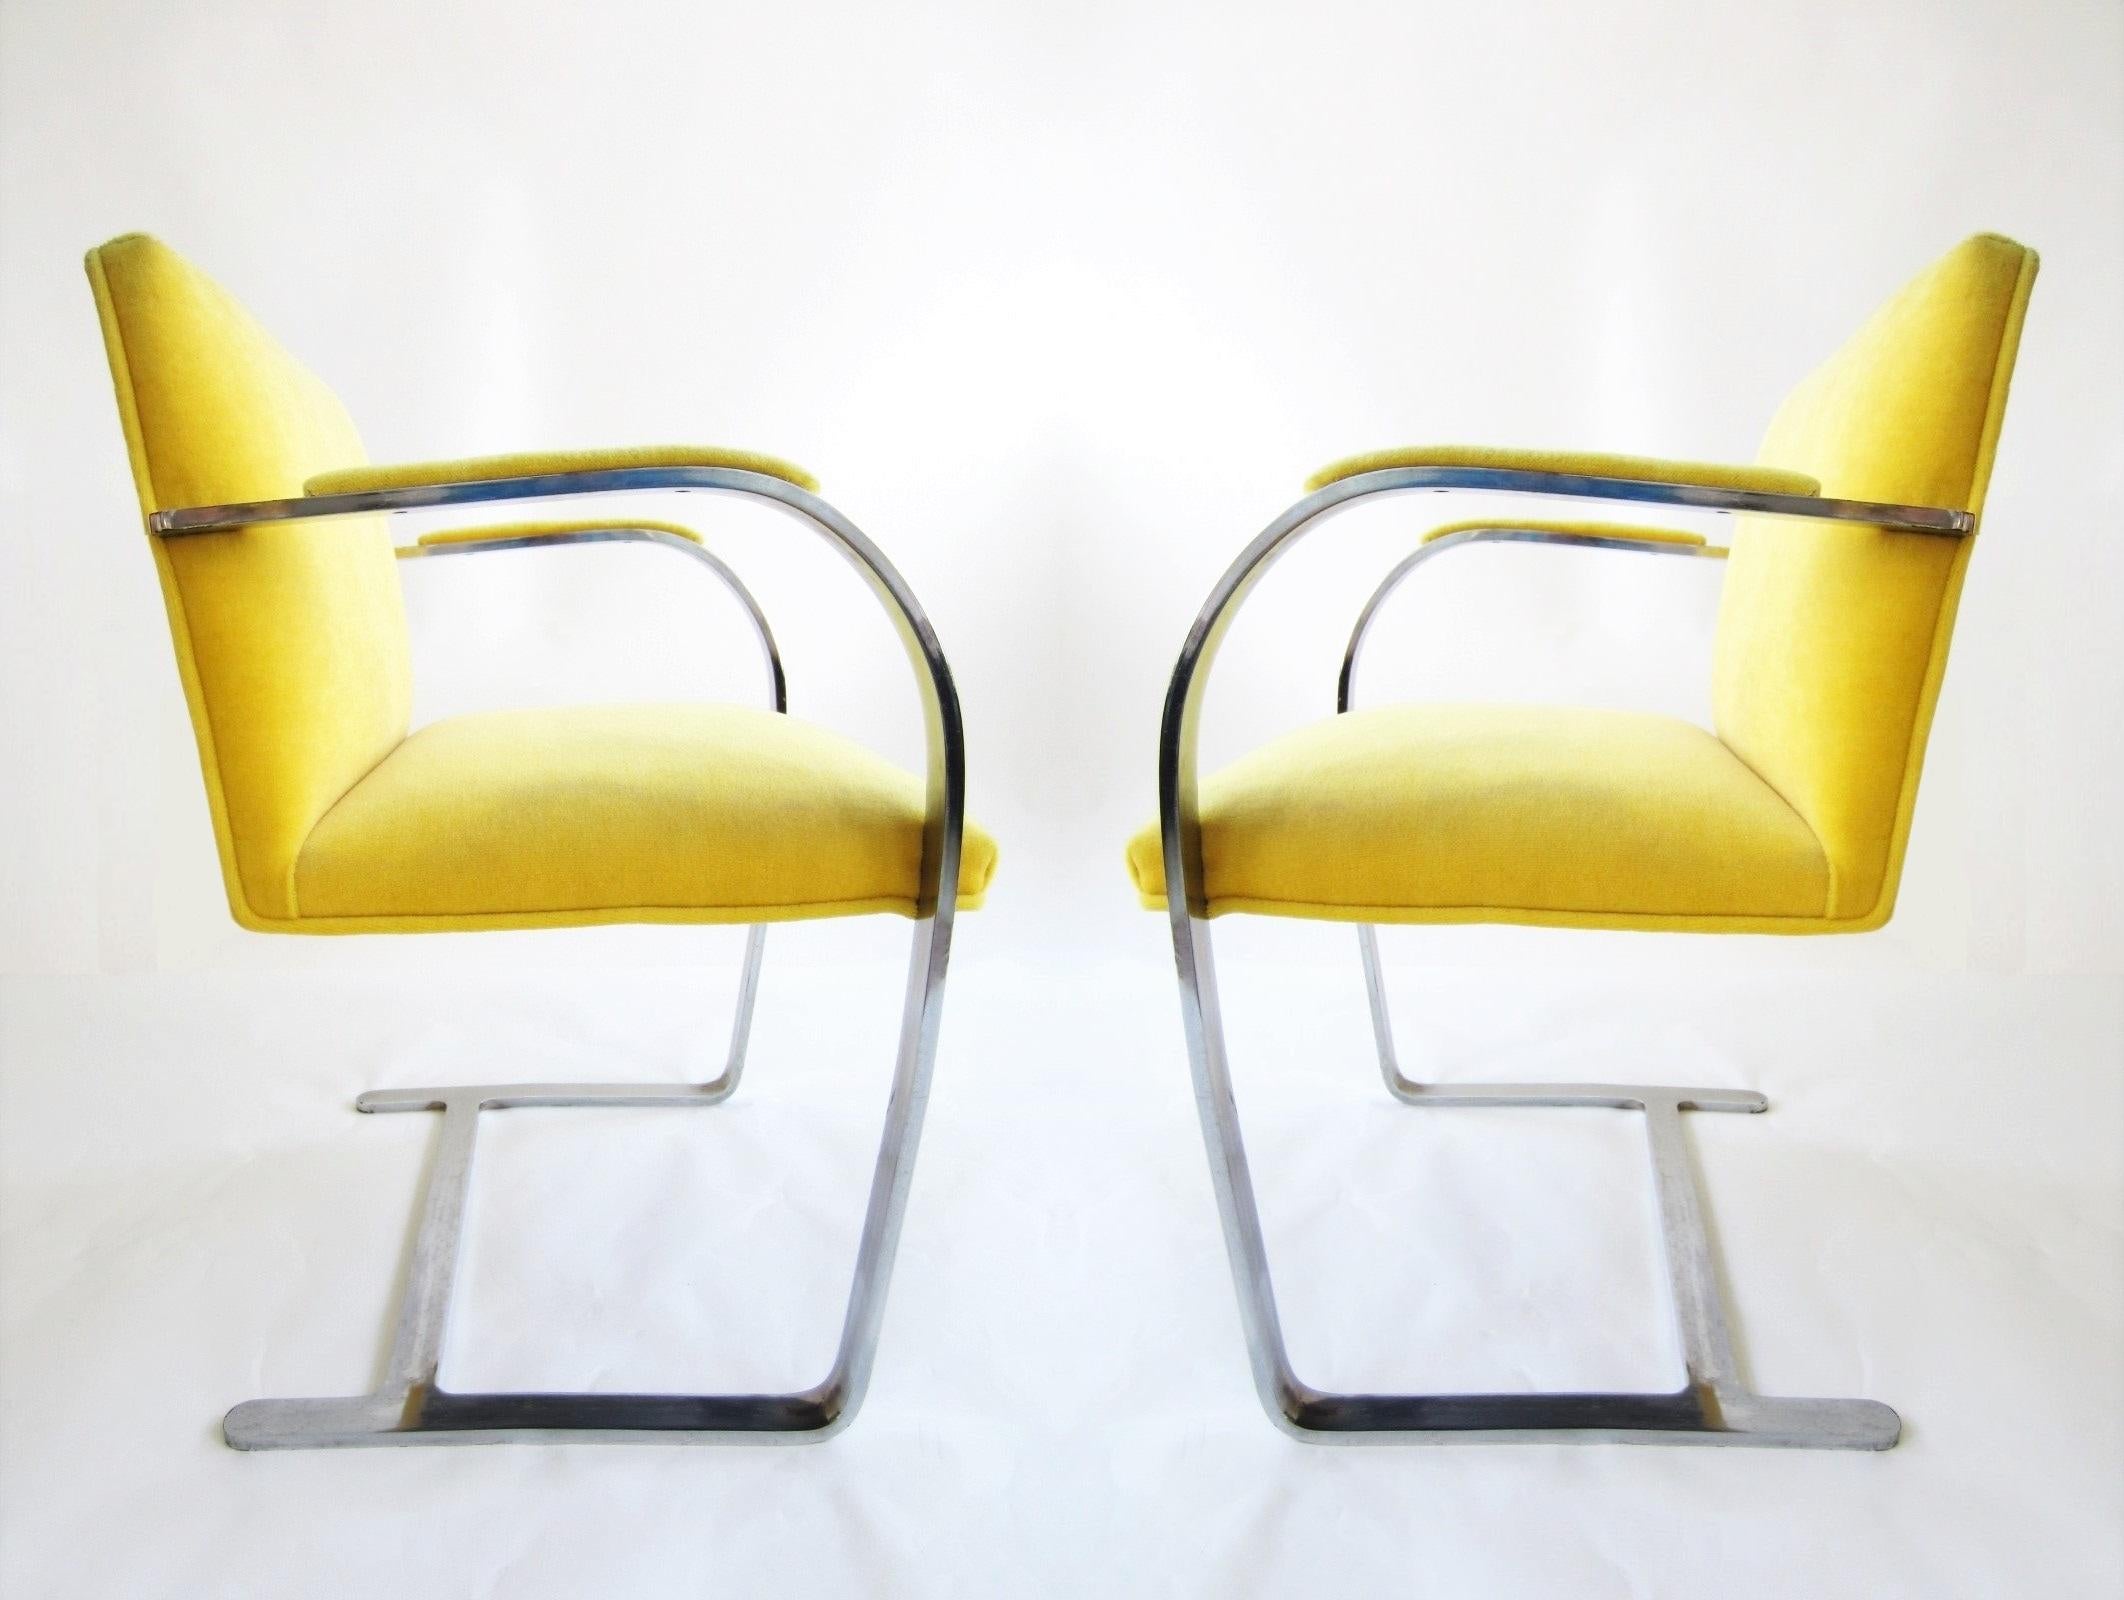 These vintage modern Brno flat bar chairs are sleek and timeless. Chairs feature cantilevered, heavy stainless steel flat-bar frames. The seat, backrest and the arched armrests newly re-upholstered in yellow velvet. Unmarked. Designed for multi-use